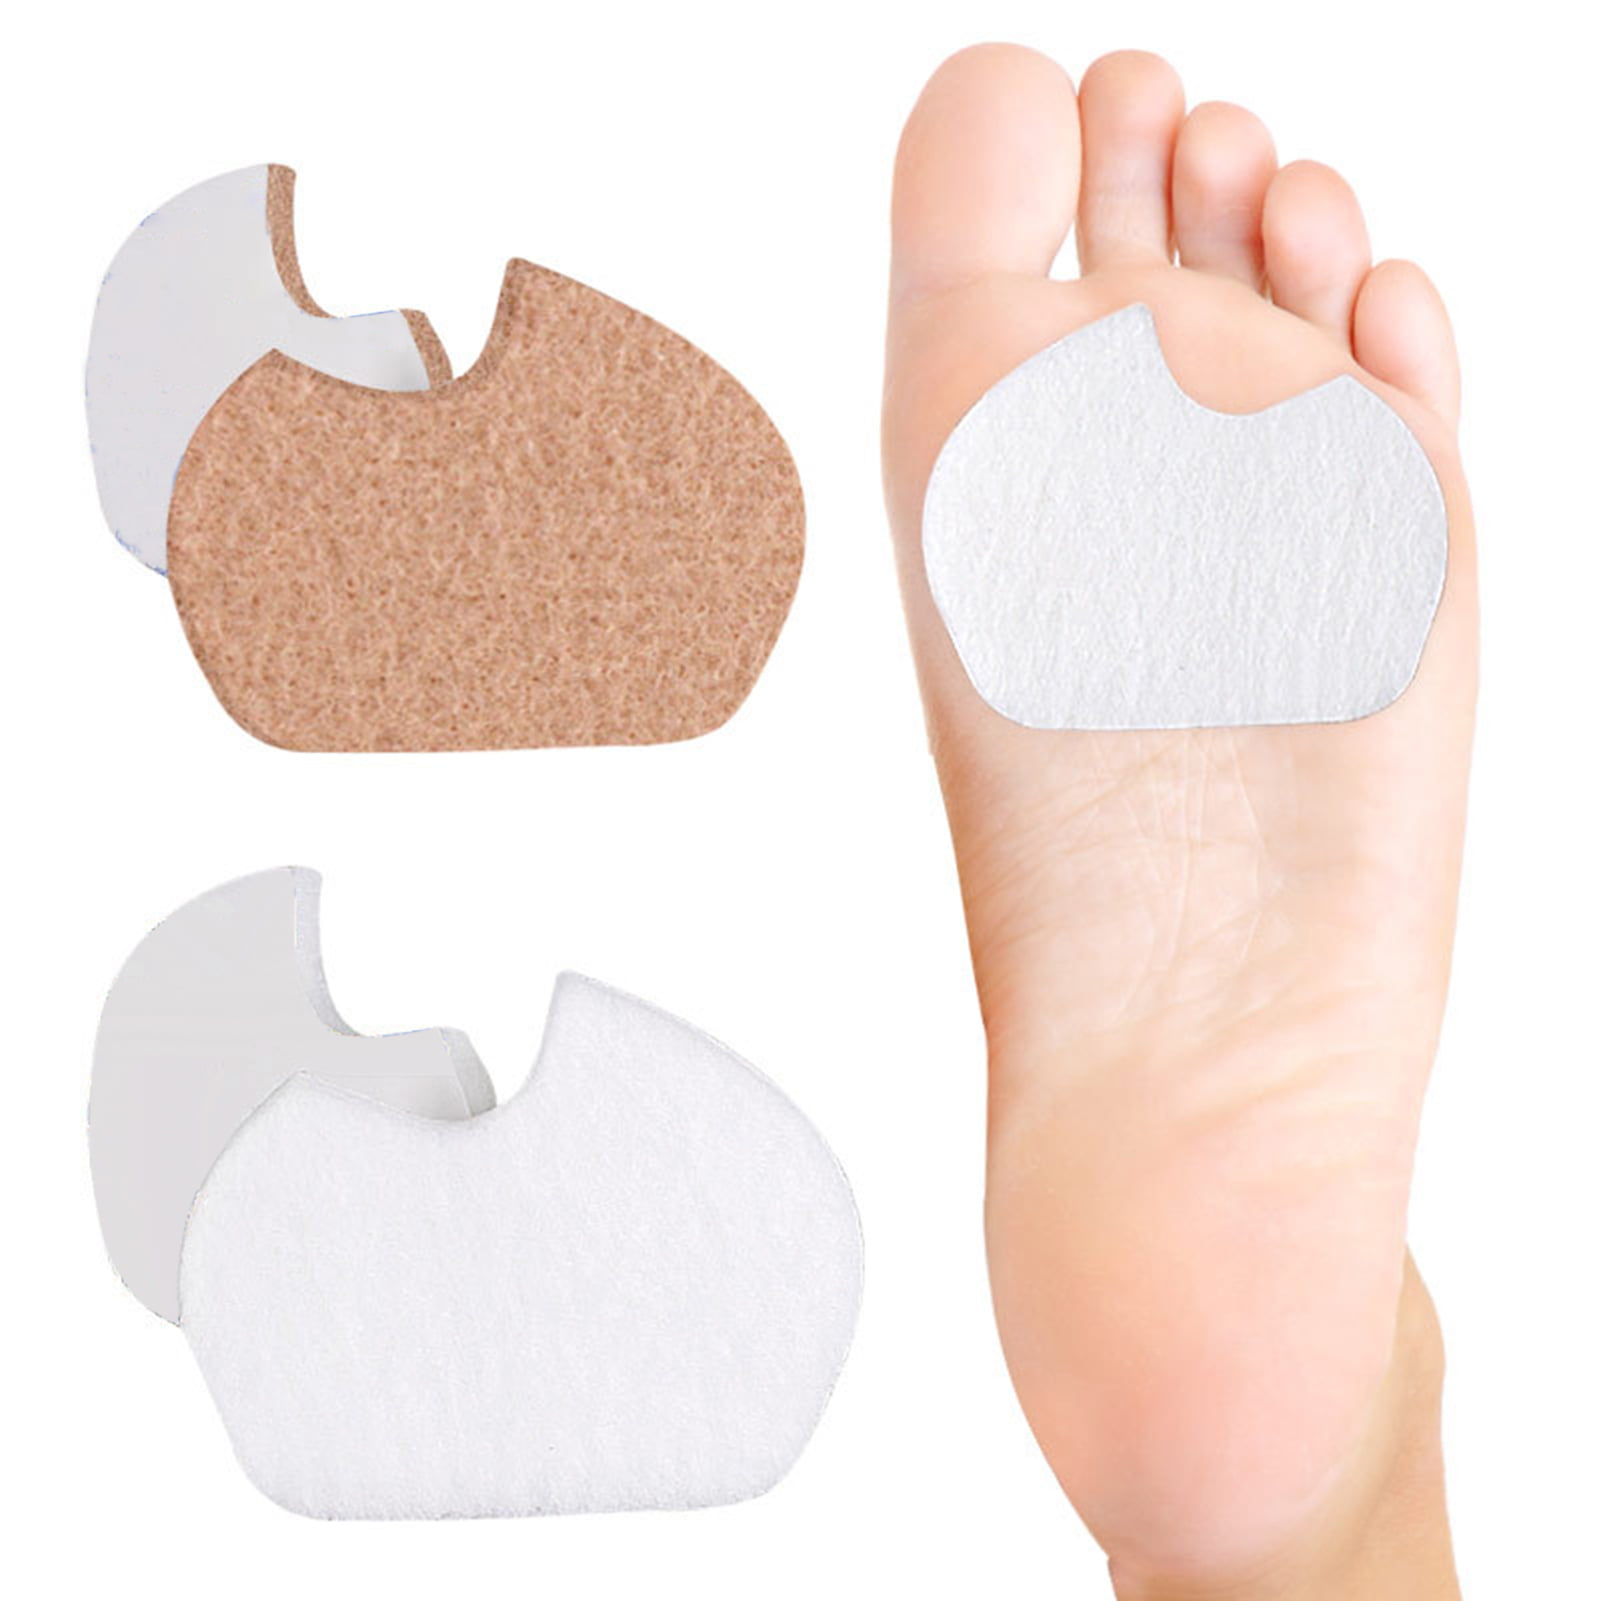 4 Pairs 2x Skyfoot's Metatarsal Pads and Ball of Foot Cushions for Pain Relief 